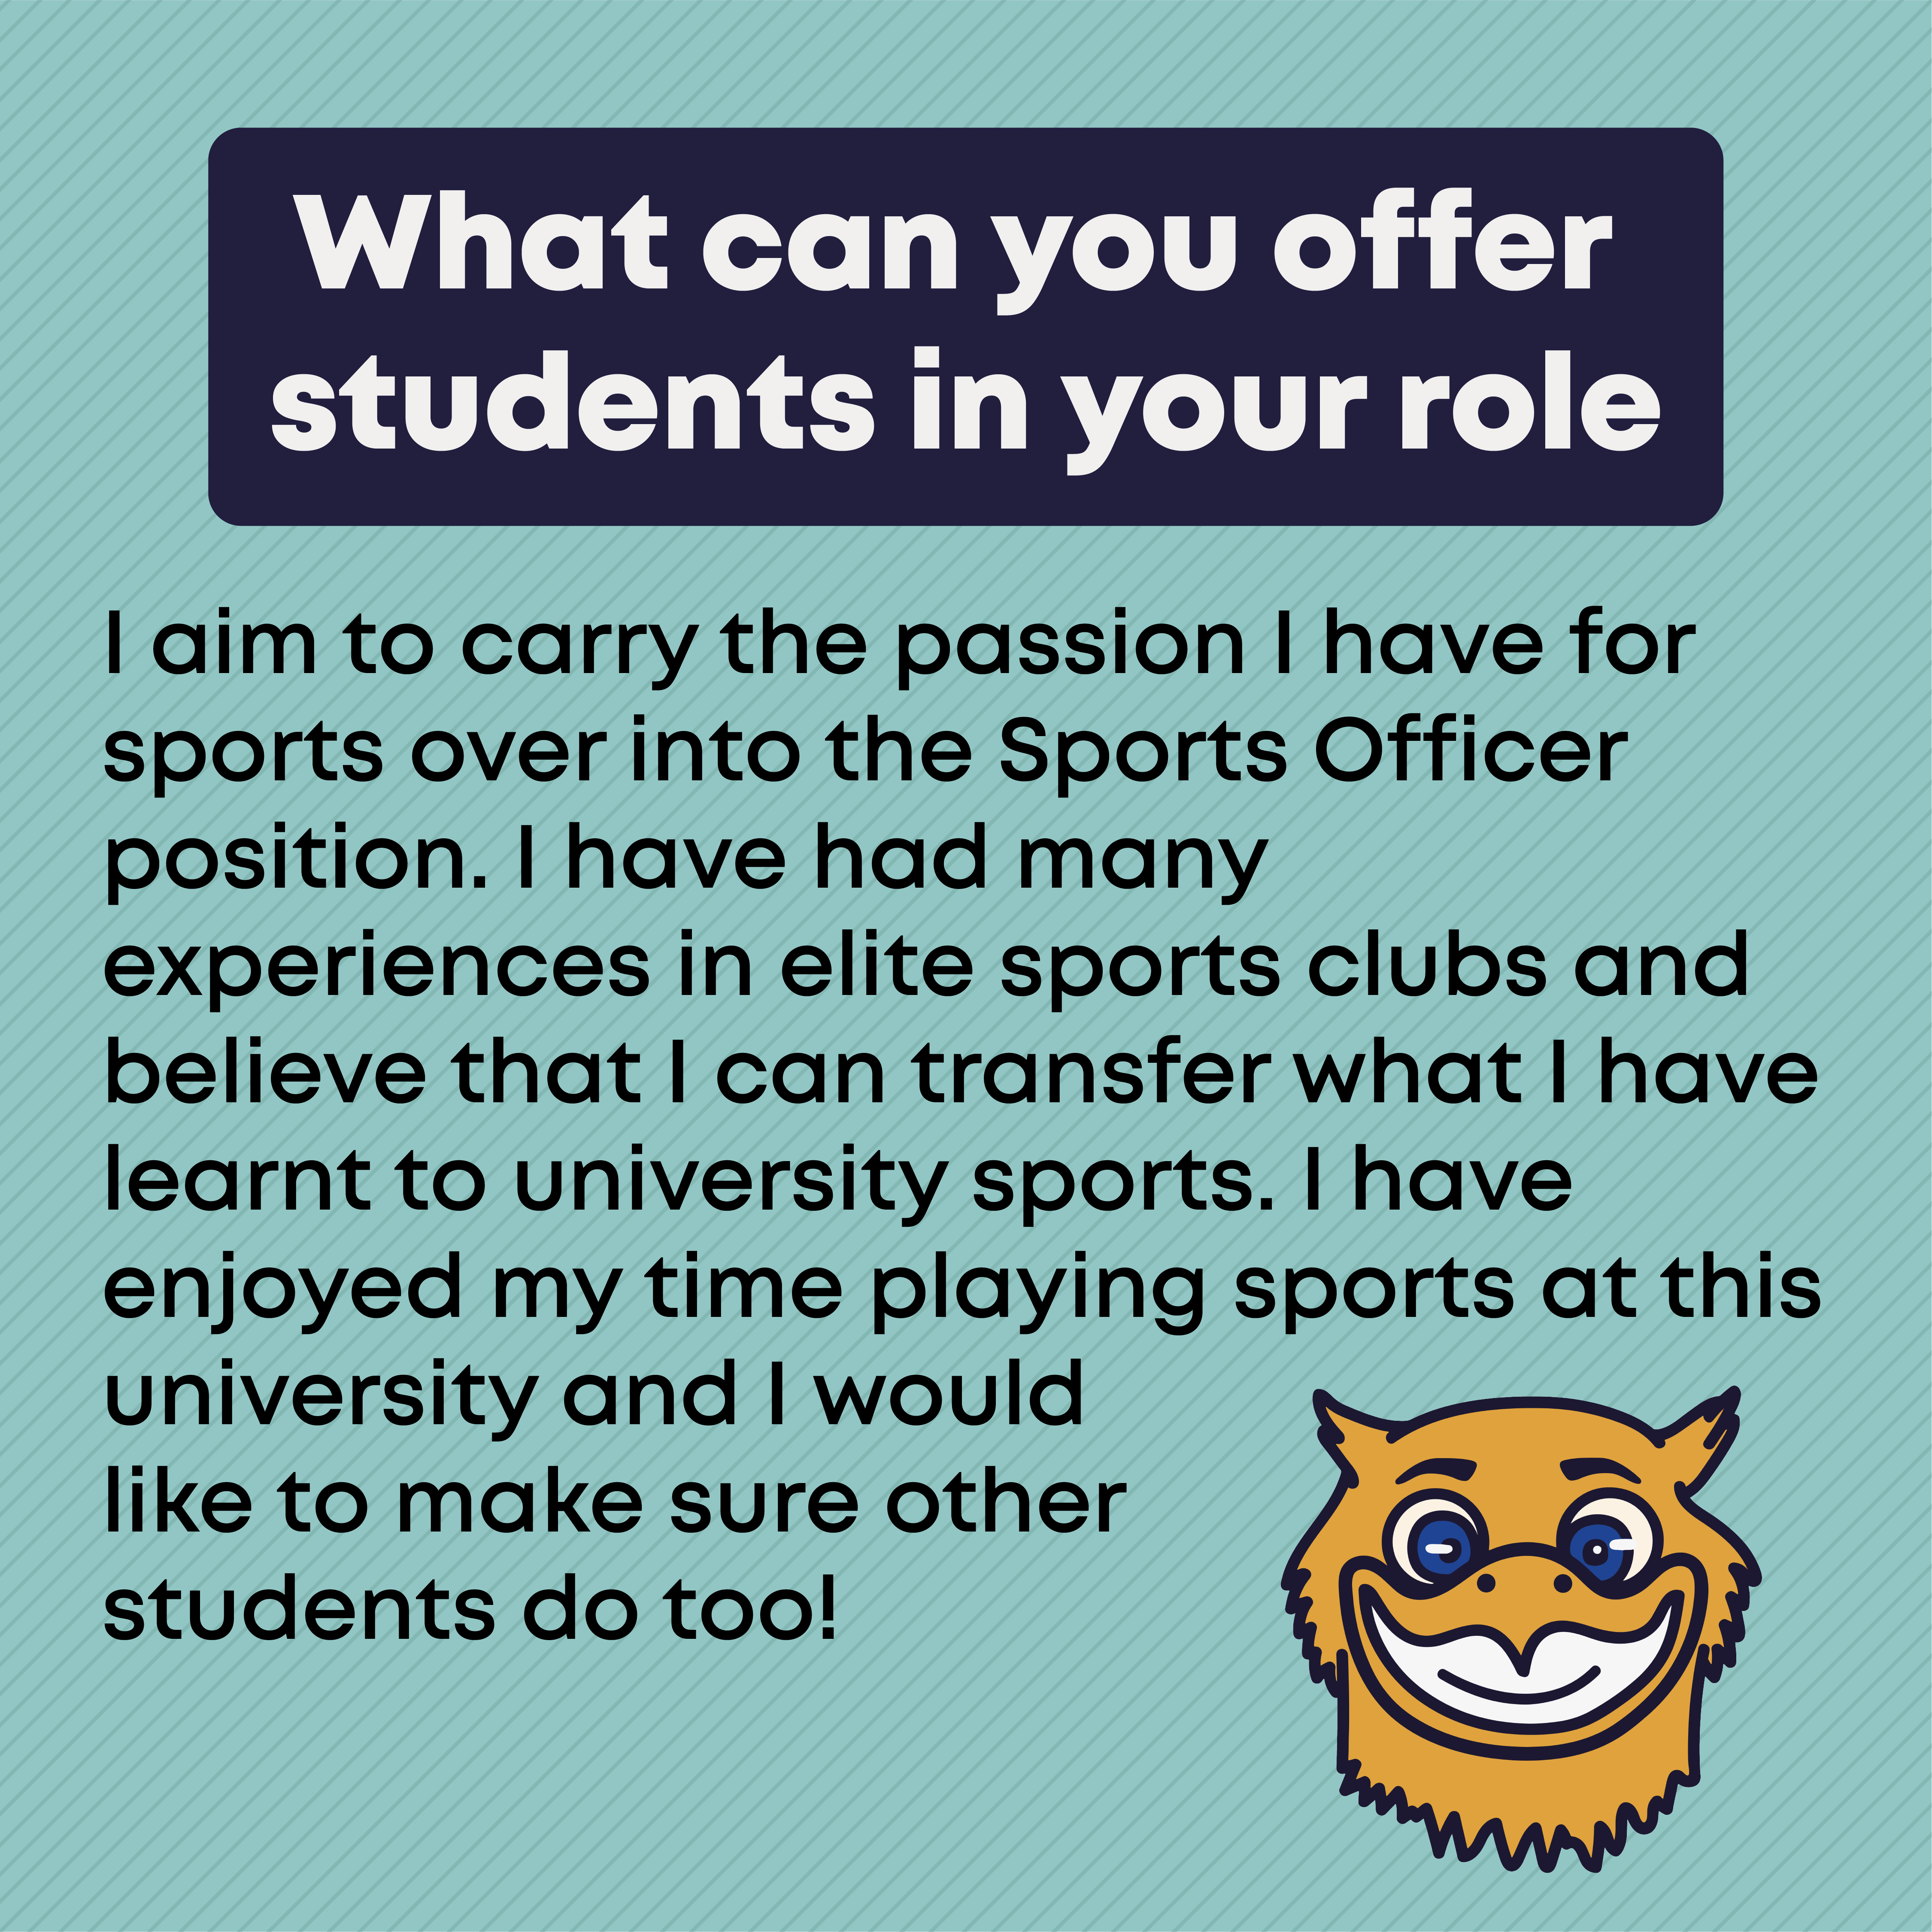 What can you offer students in your role?  I aim to carry the passion I have for sports over into the Sports Officer position. I have had many experiences in elite sports clubs and believe that I can transfer what I have learnt to university sports. I have enjoyed my time playing sports at this university and I would like to make sure other students do too!